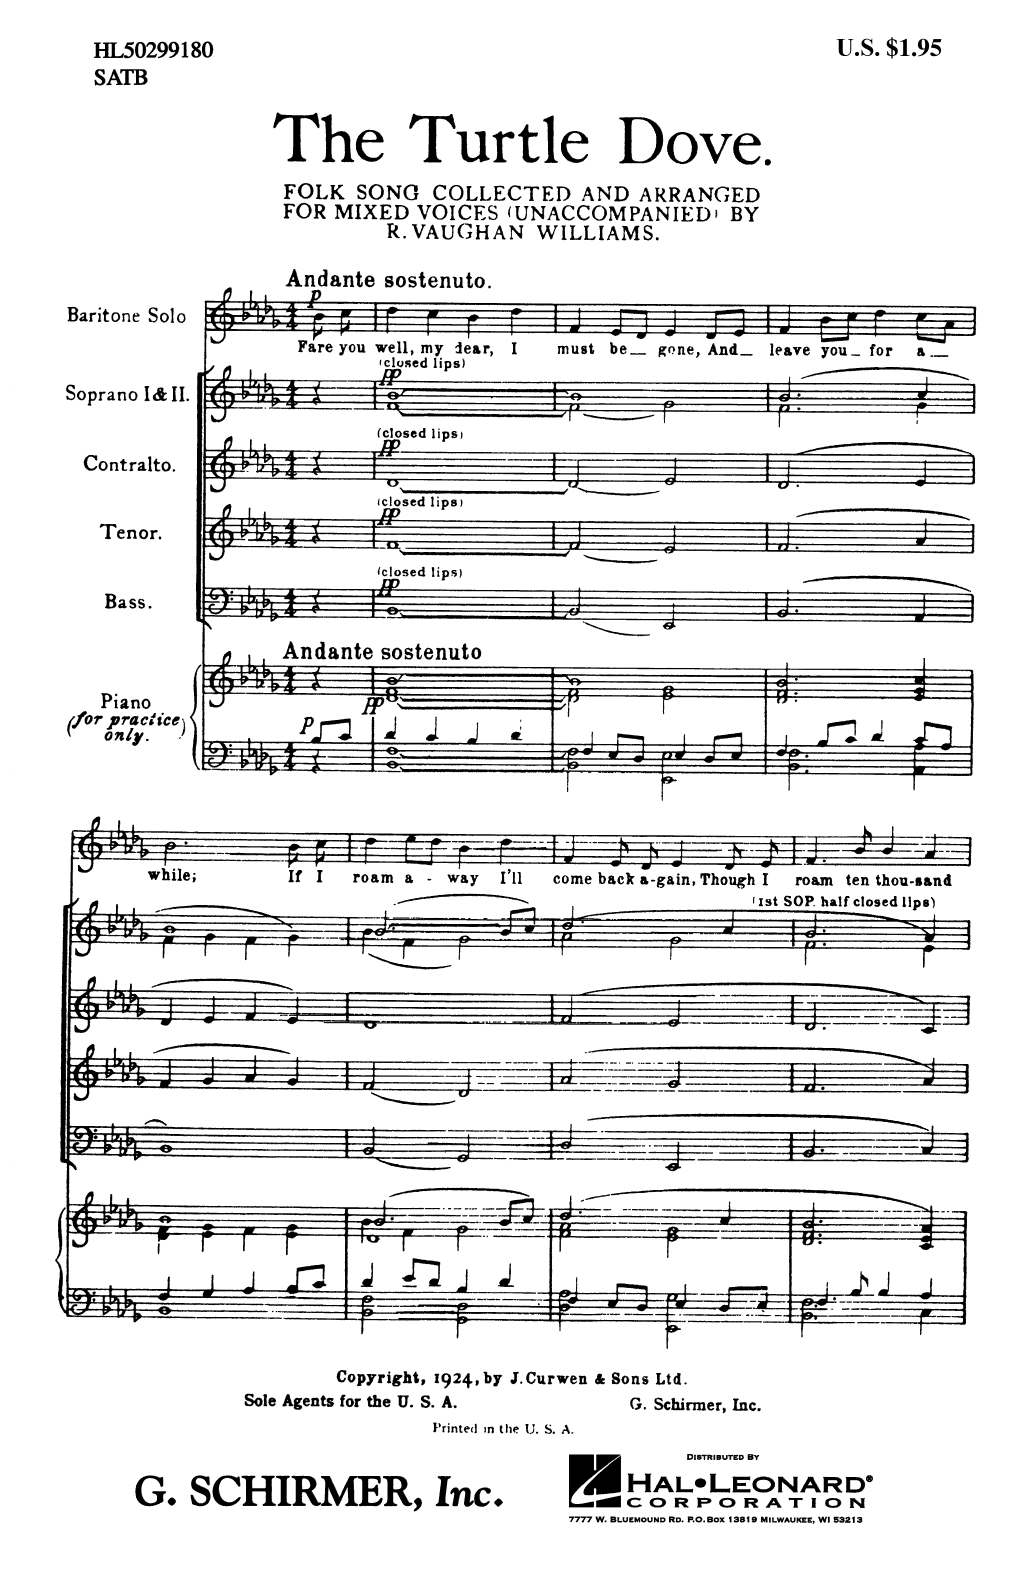 Download Ralph Vaughan Williams The Turtle Dove Sheet Music